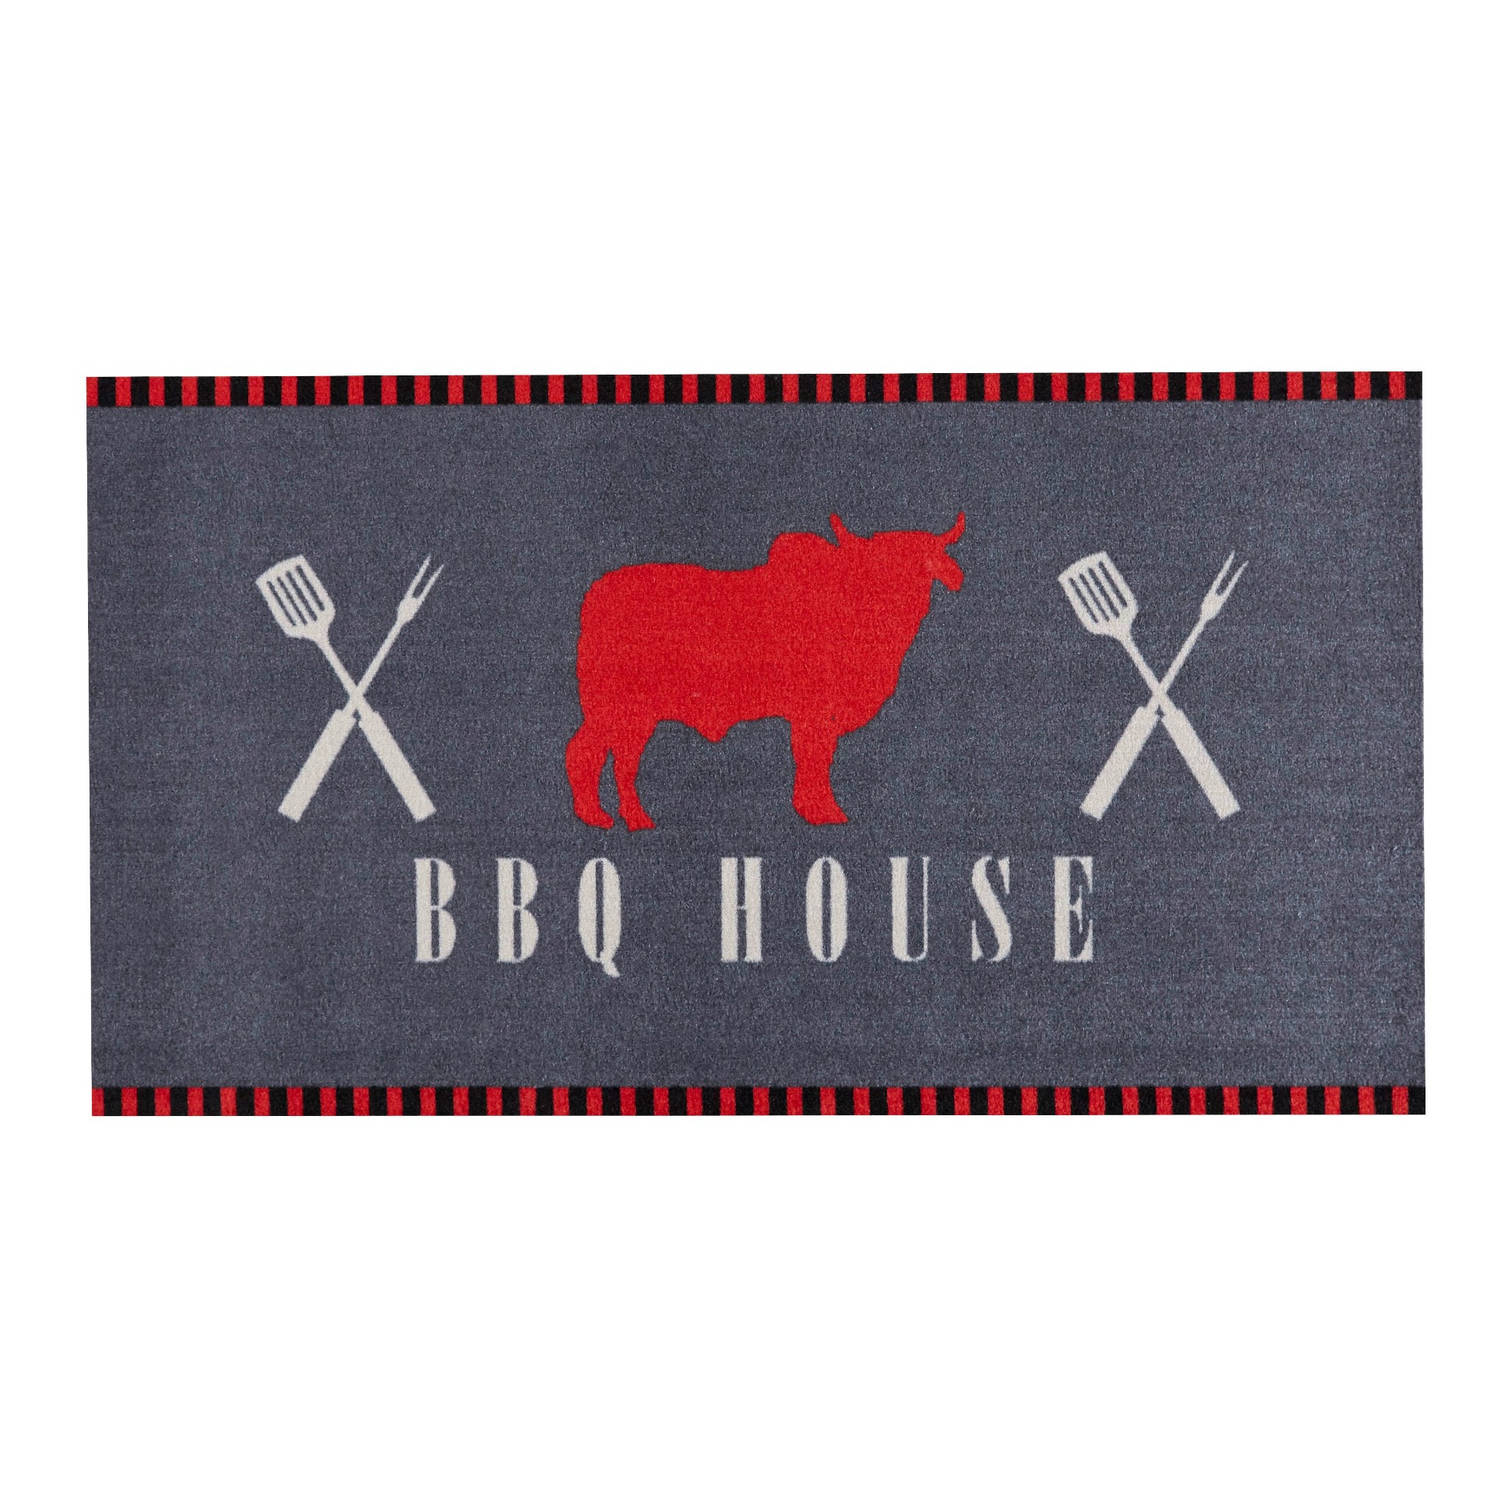 MD Entree - Barbecue Mat - BBQ House - 67 x 120 cm